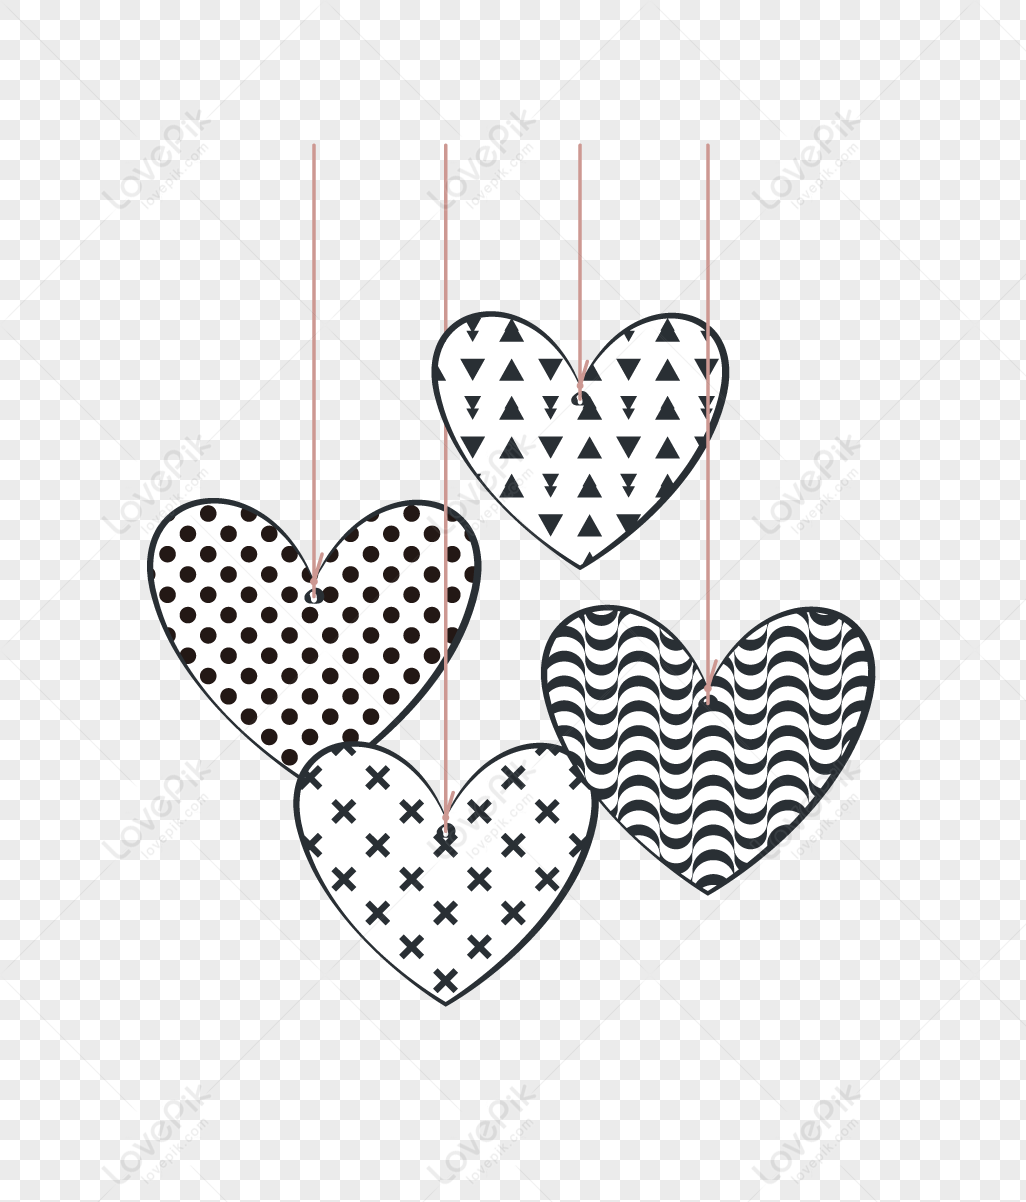 Valentines Day Creative Heart Design Elements PNG Transparent Background  And Clipart Image For Free Download - Lovepik | 400953690